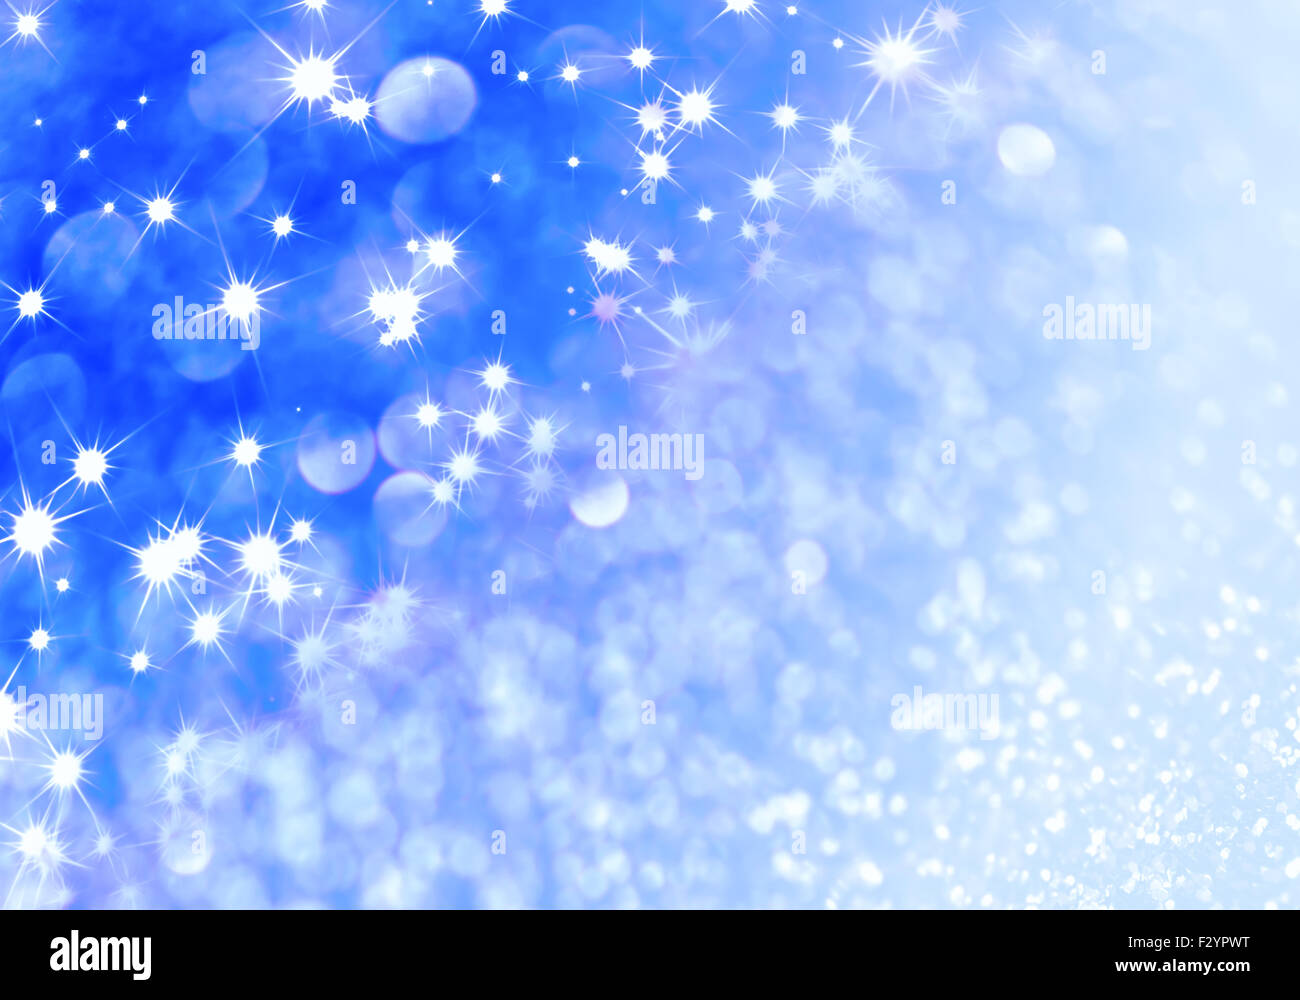 Blue defocused glitter background with copy space Stock Photo